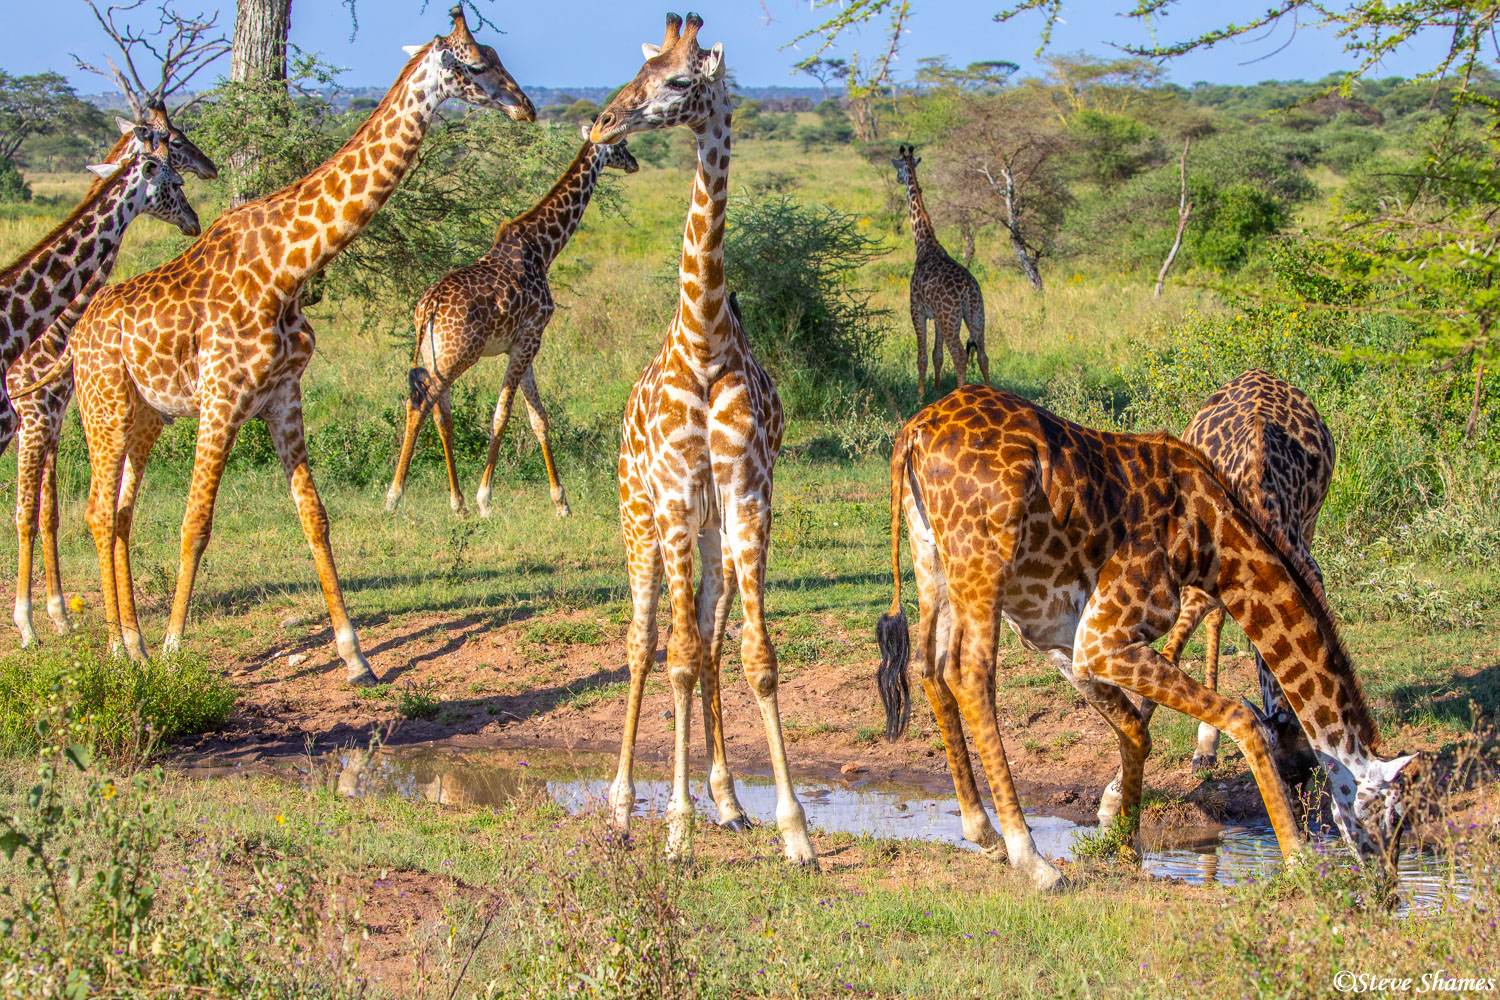 Here is a "tower" of giraffes. Yes, that is what a group of giraffes is called.